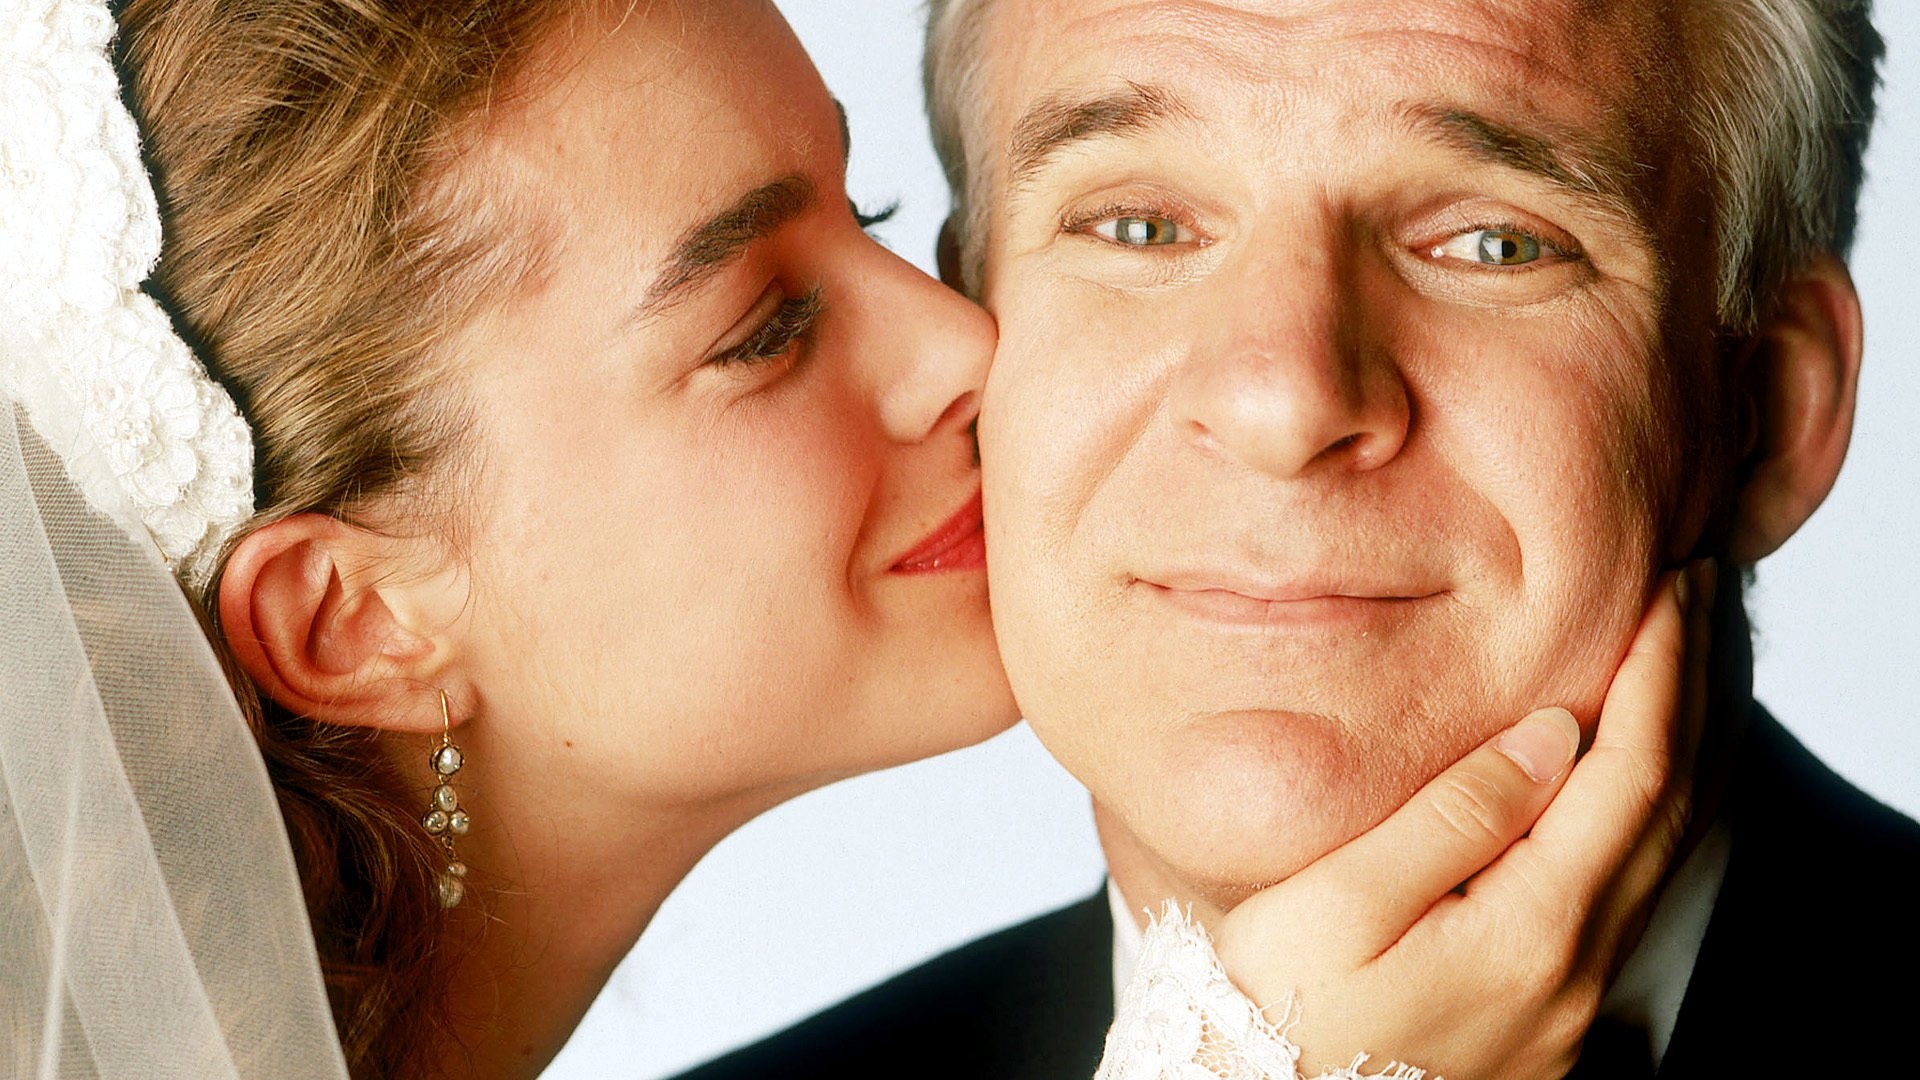 Father of the Bride: A 1991 American romantic comedy film, Music by Alan Silvestri. 1920x1080 Full HD Wallpaper.